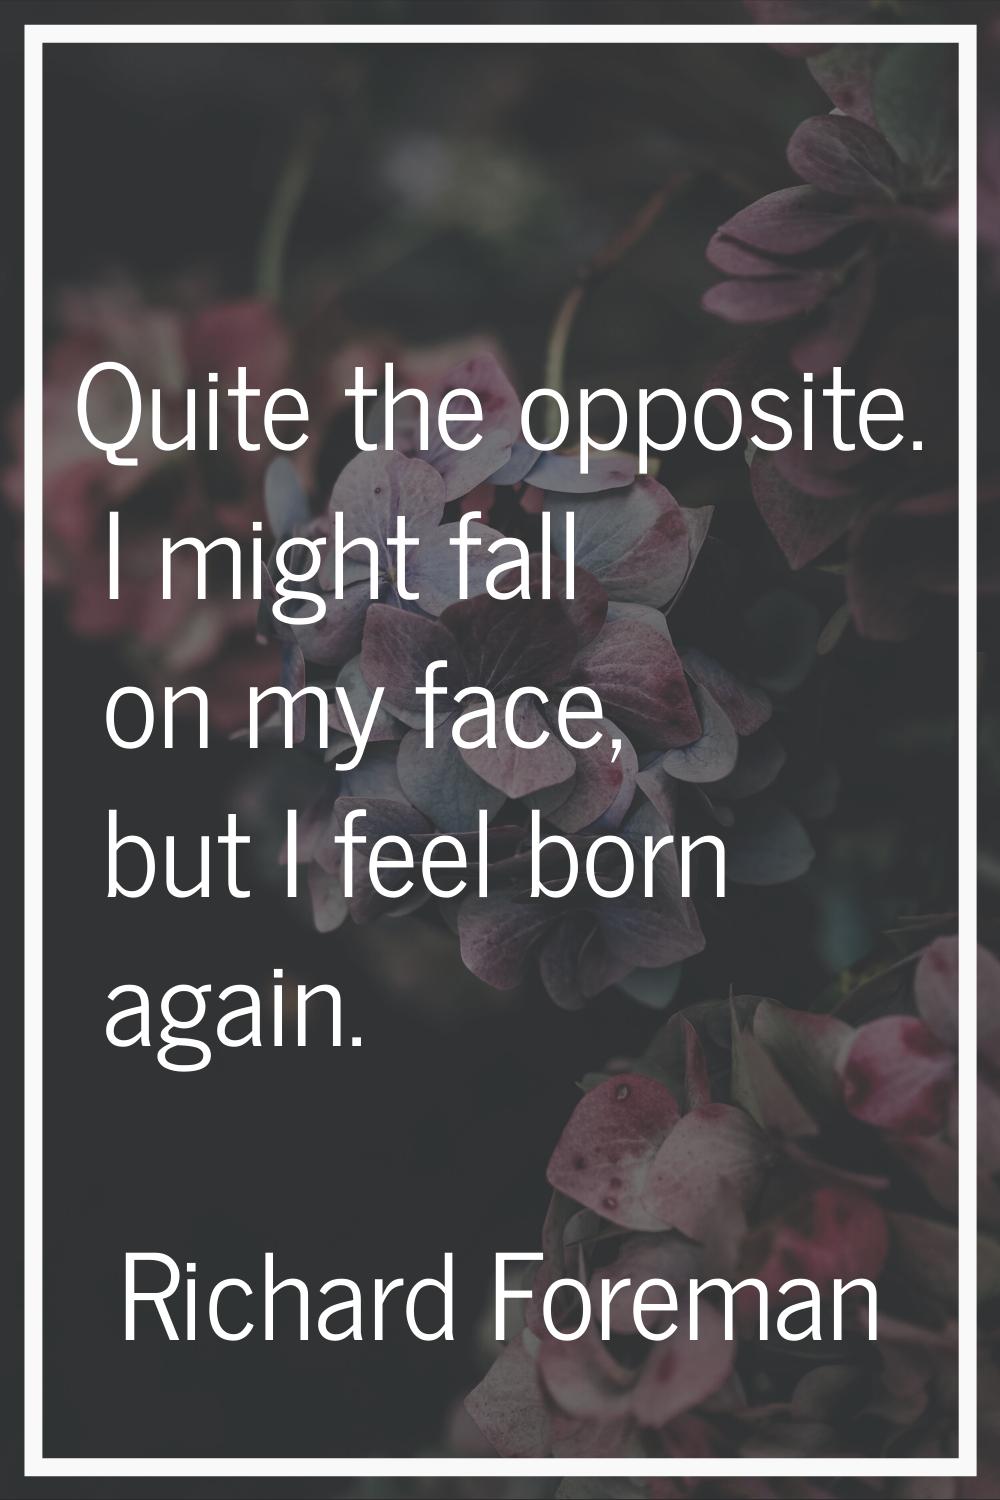 Quite the opposite. I might fall on my face, but I feel born again.